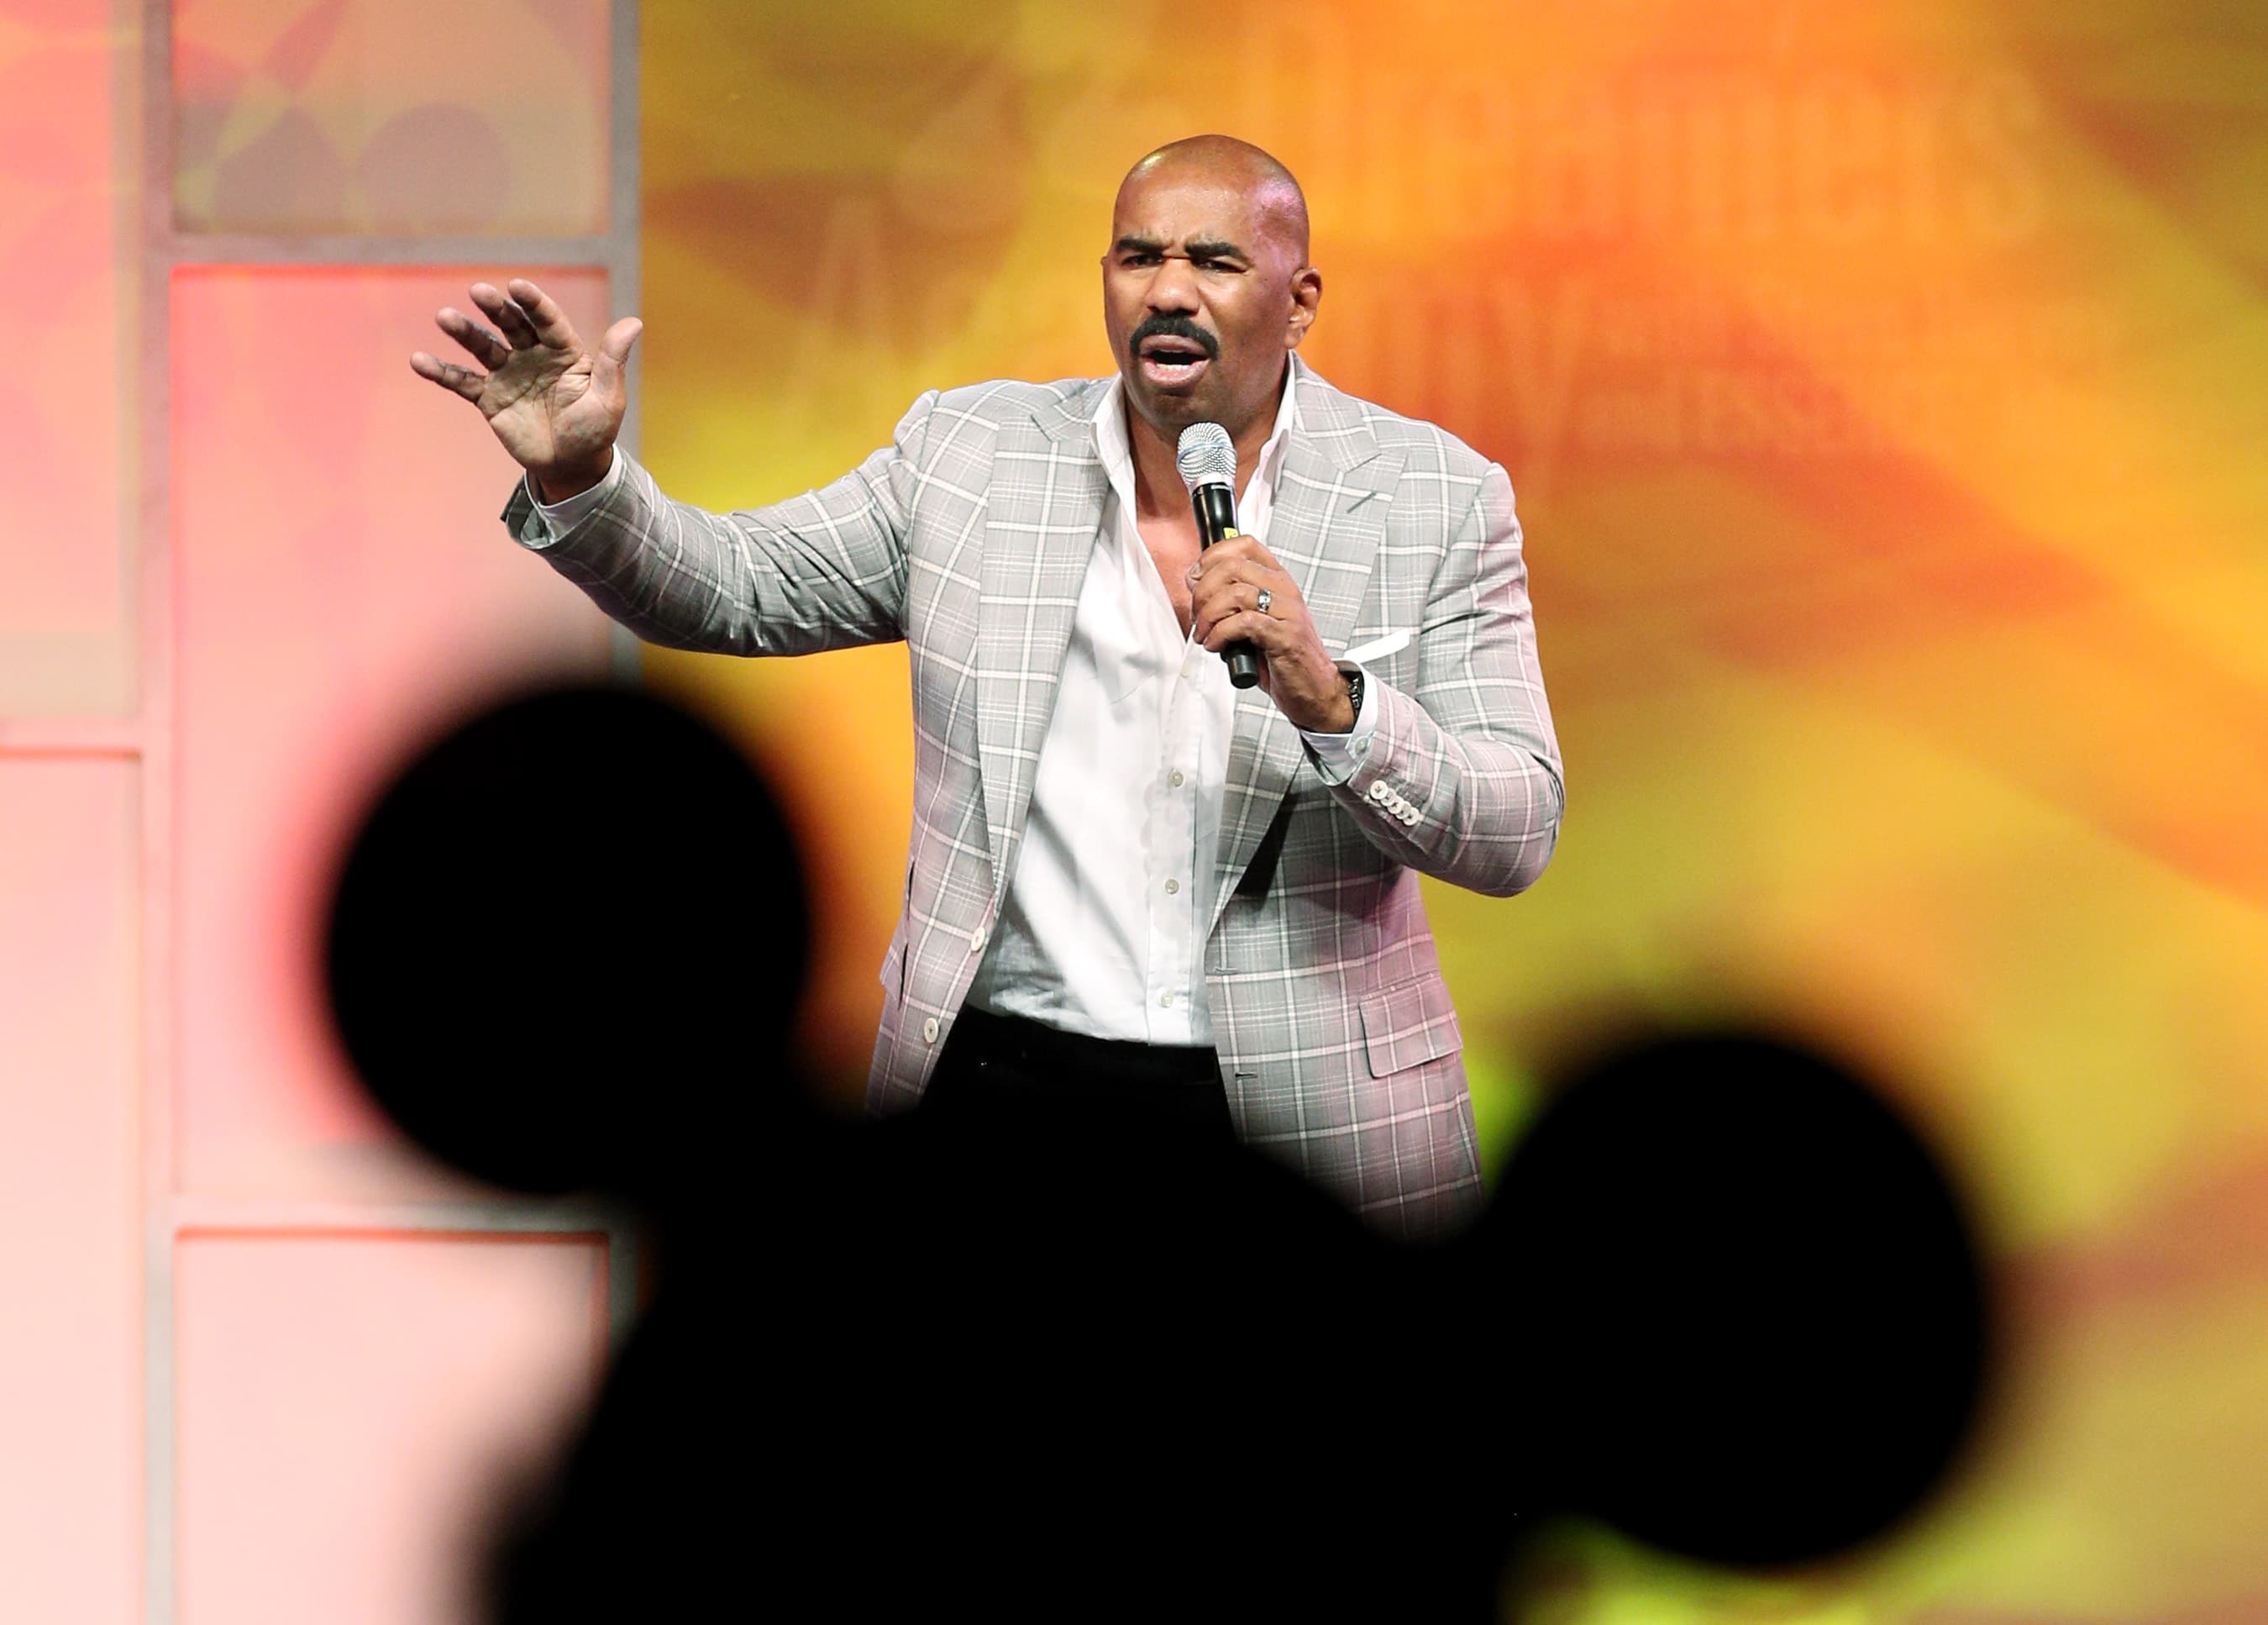 Syndicated radio and television personality Steve Harvey during Disney Dreamers Academy with Steve Harvey and Essence Magazine March 5-8, 2015 at Disney in Lake Buena Vista, Fla. The eighth annual event is a career-inspiration program for 100 distinguished high school students from across the U.S. and includes interactive workshops, motivational seminars, hands-on creative experiences and fun times in the theme parks. (photo courtesy of Disney)